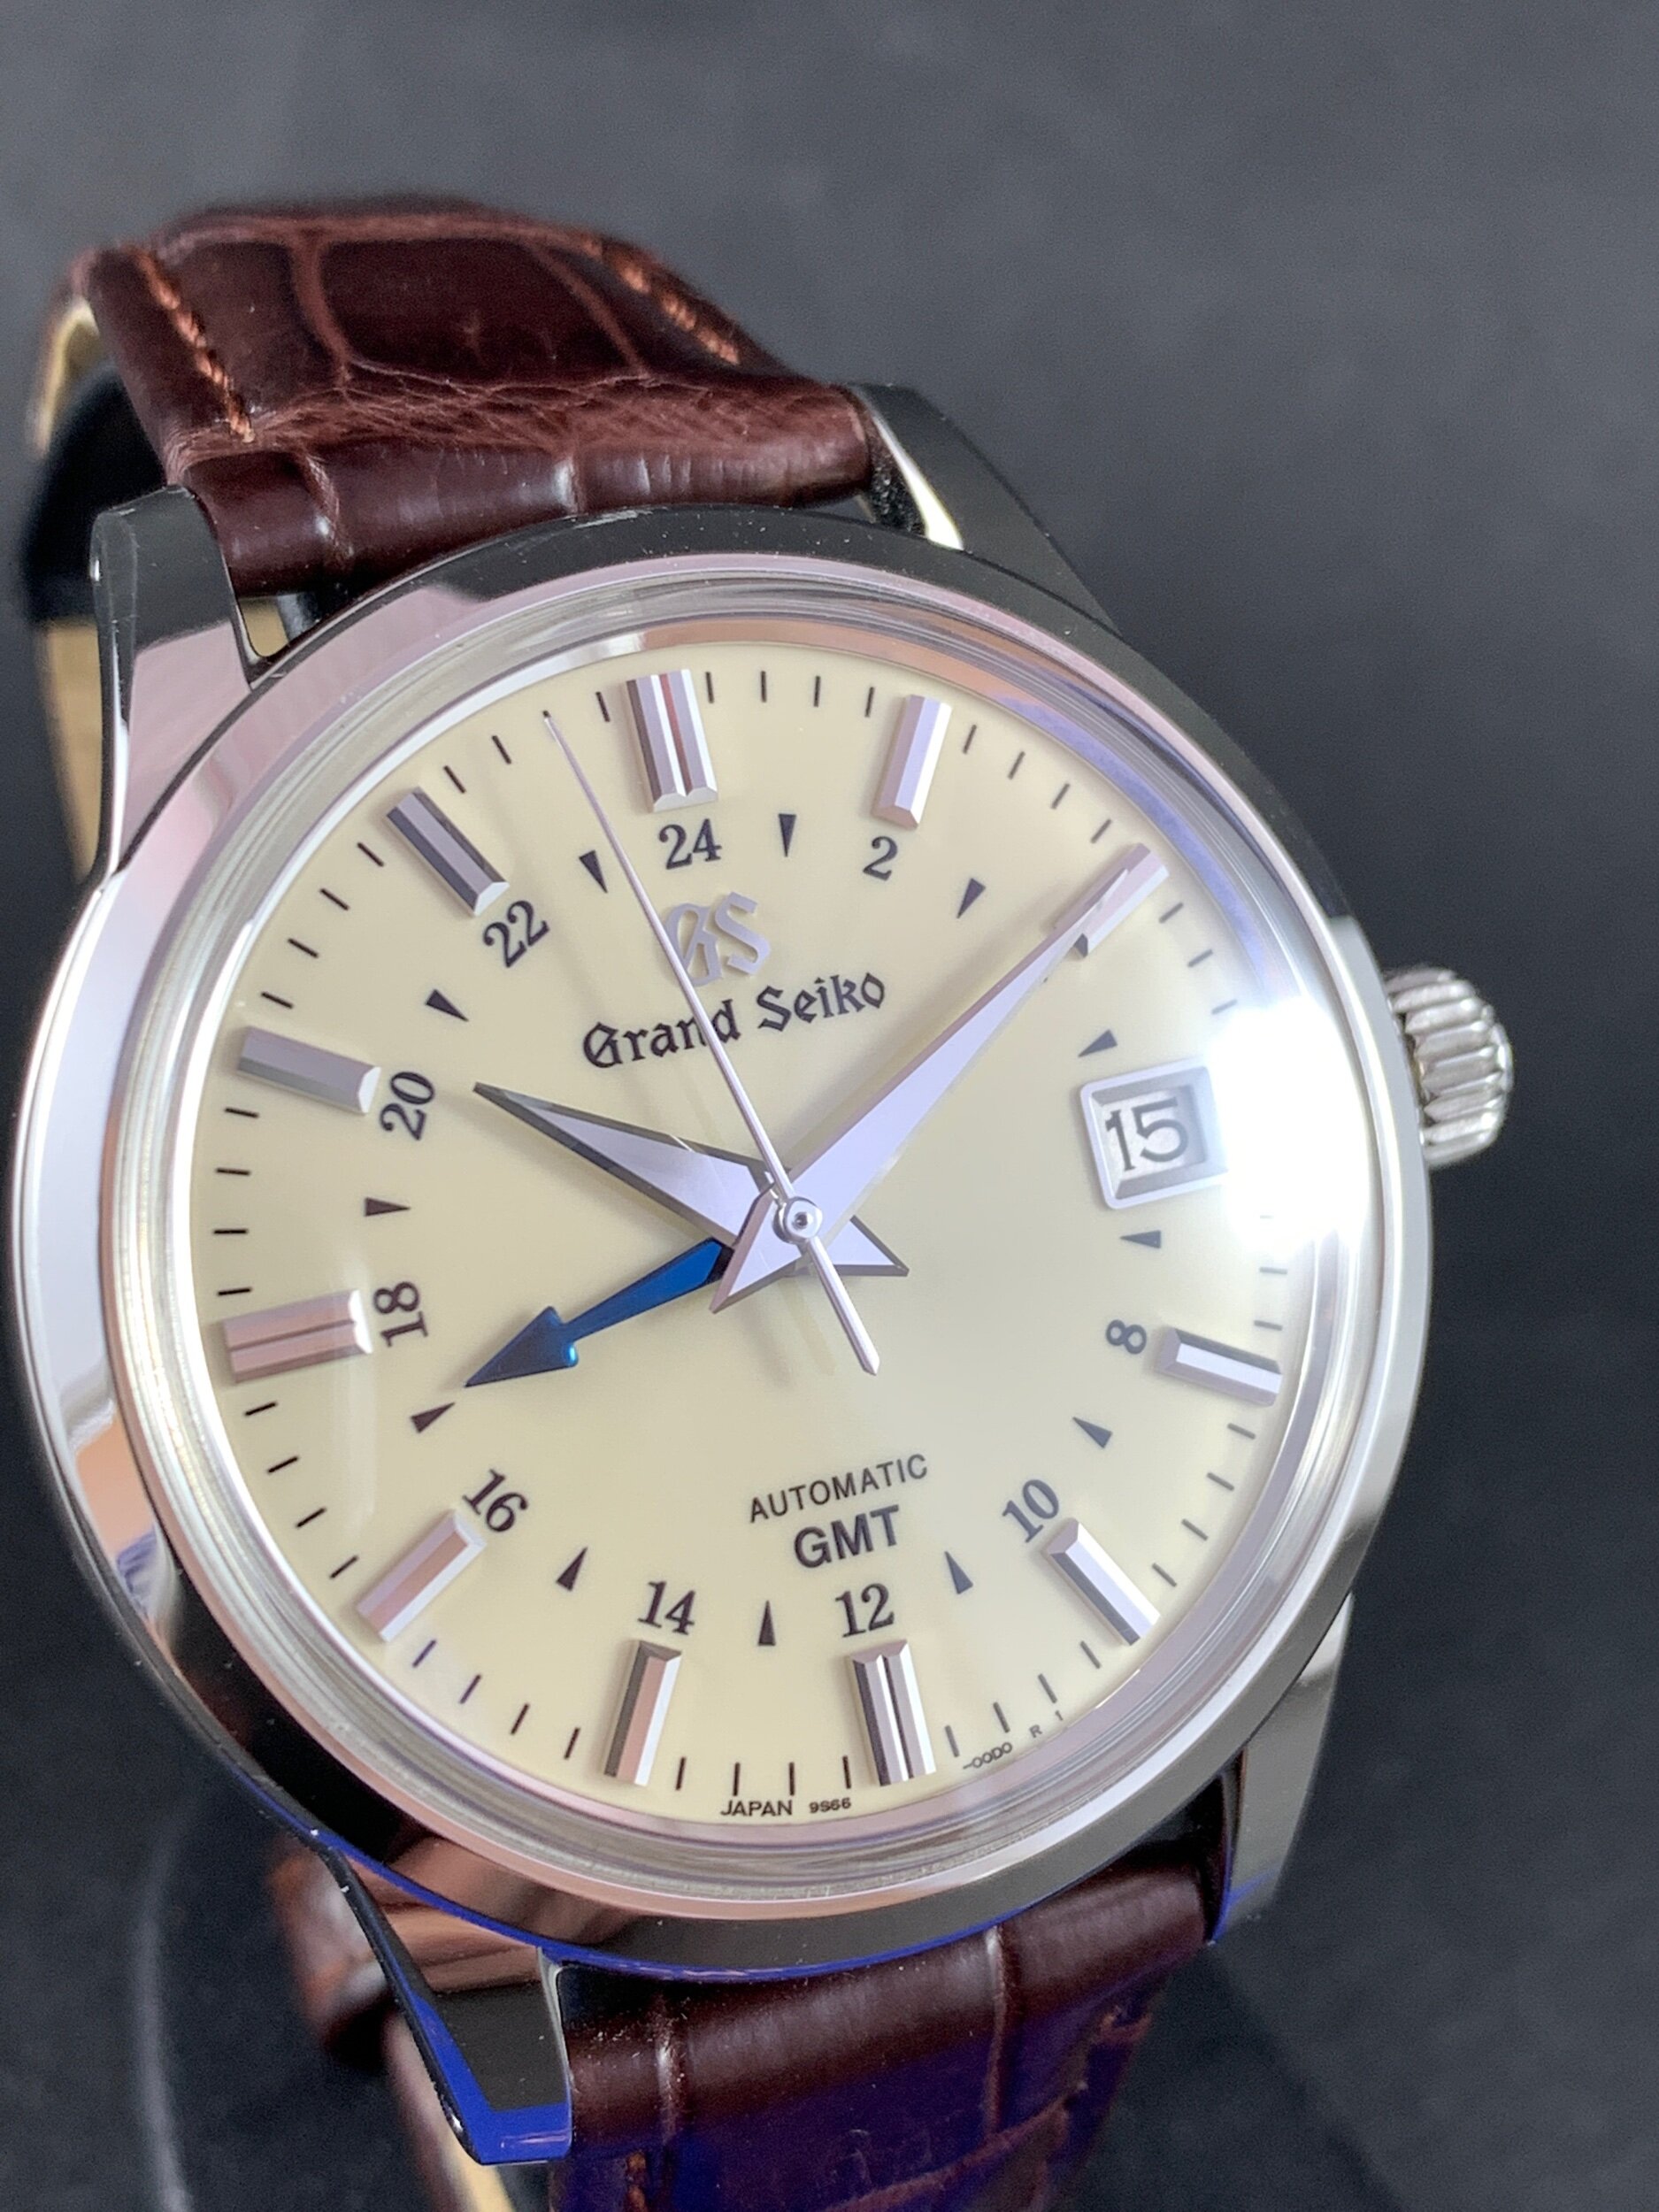 Grand Seiko GMT Automatic. —  Watchmakers